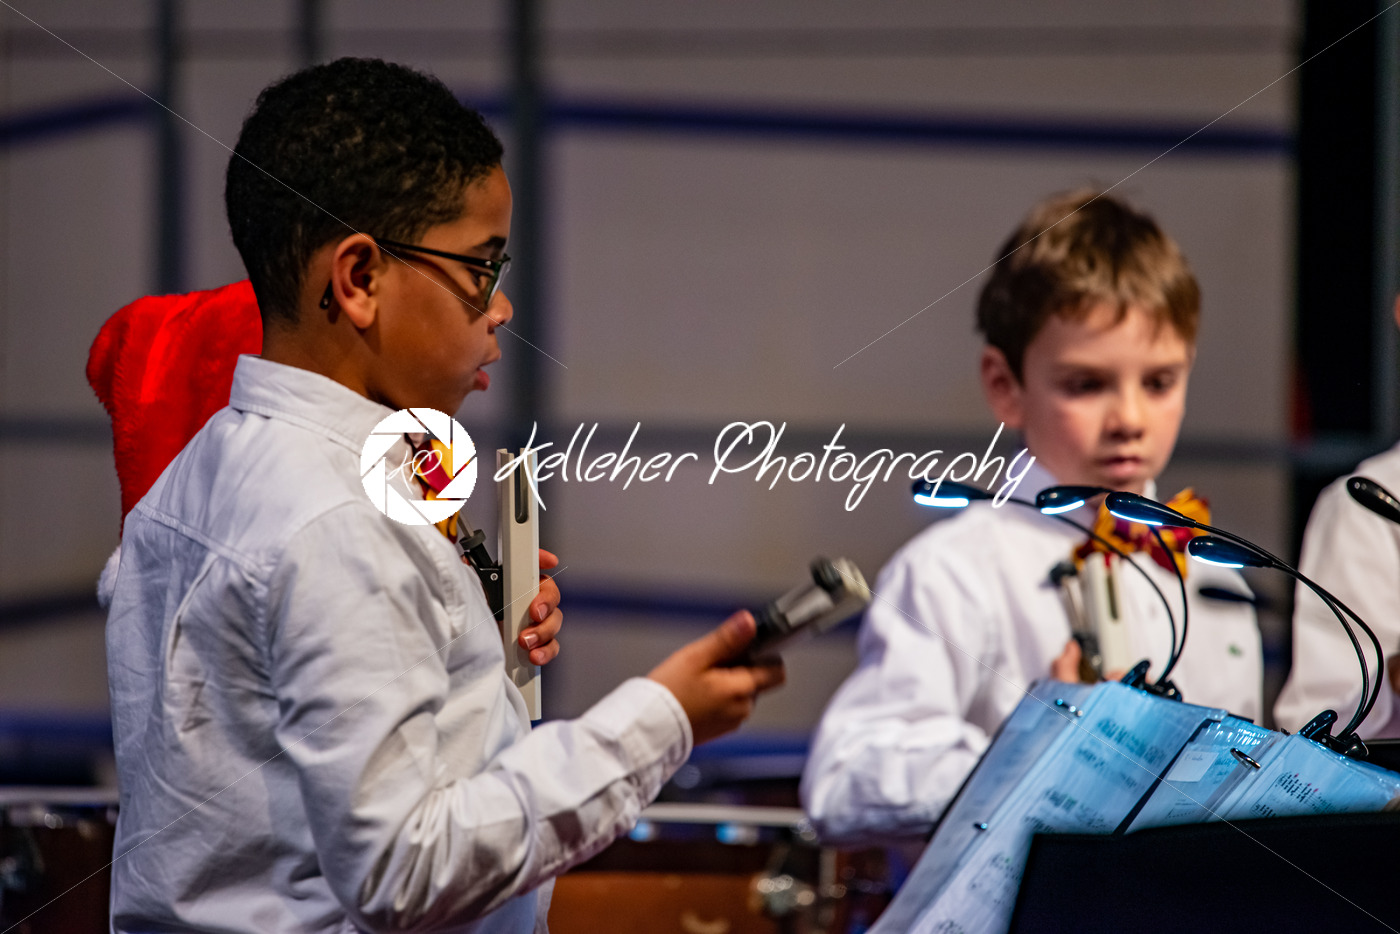 HAVERFORD, PA – December 19, 2019: Winter concert at The Haverford School - Kelleher Photography Store